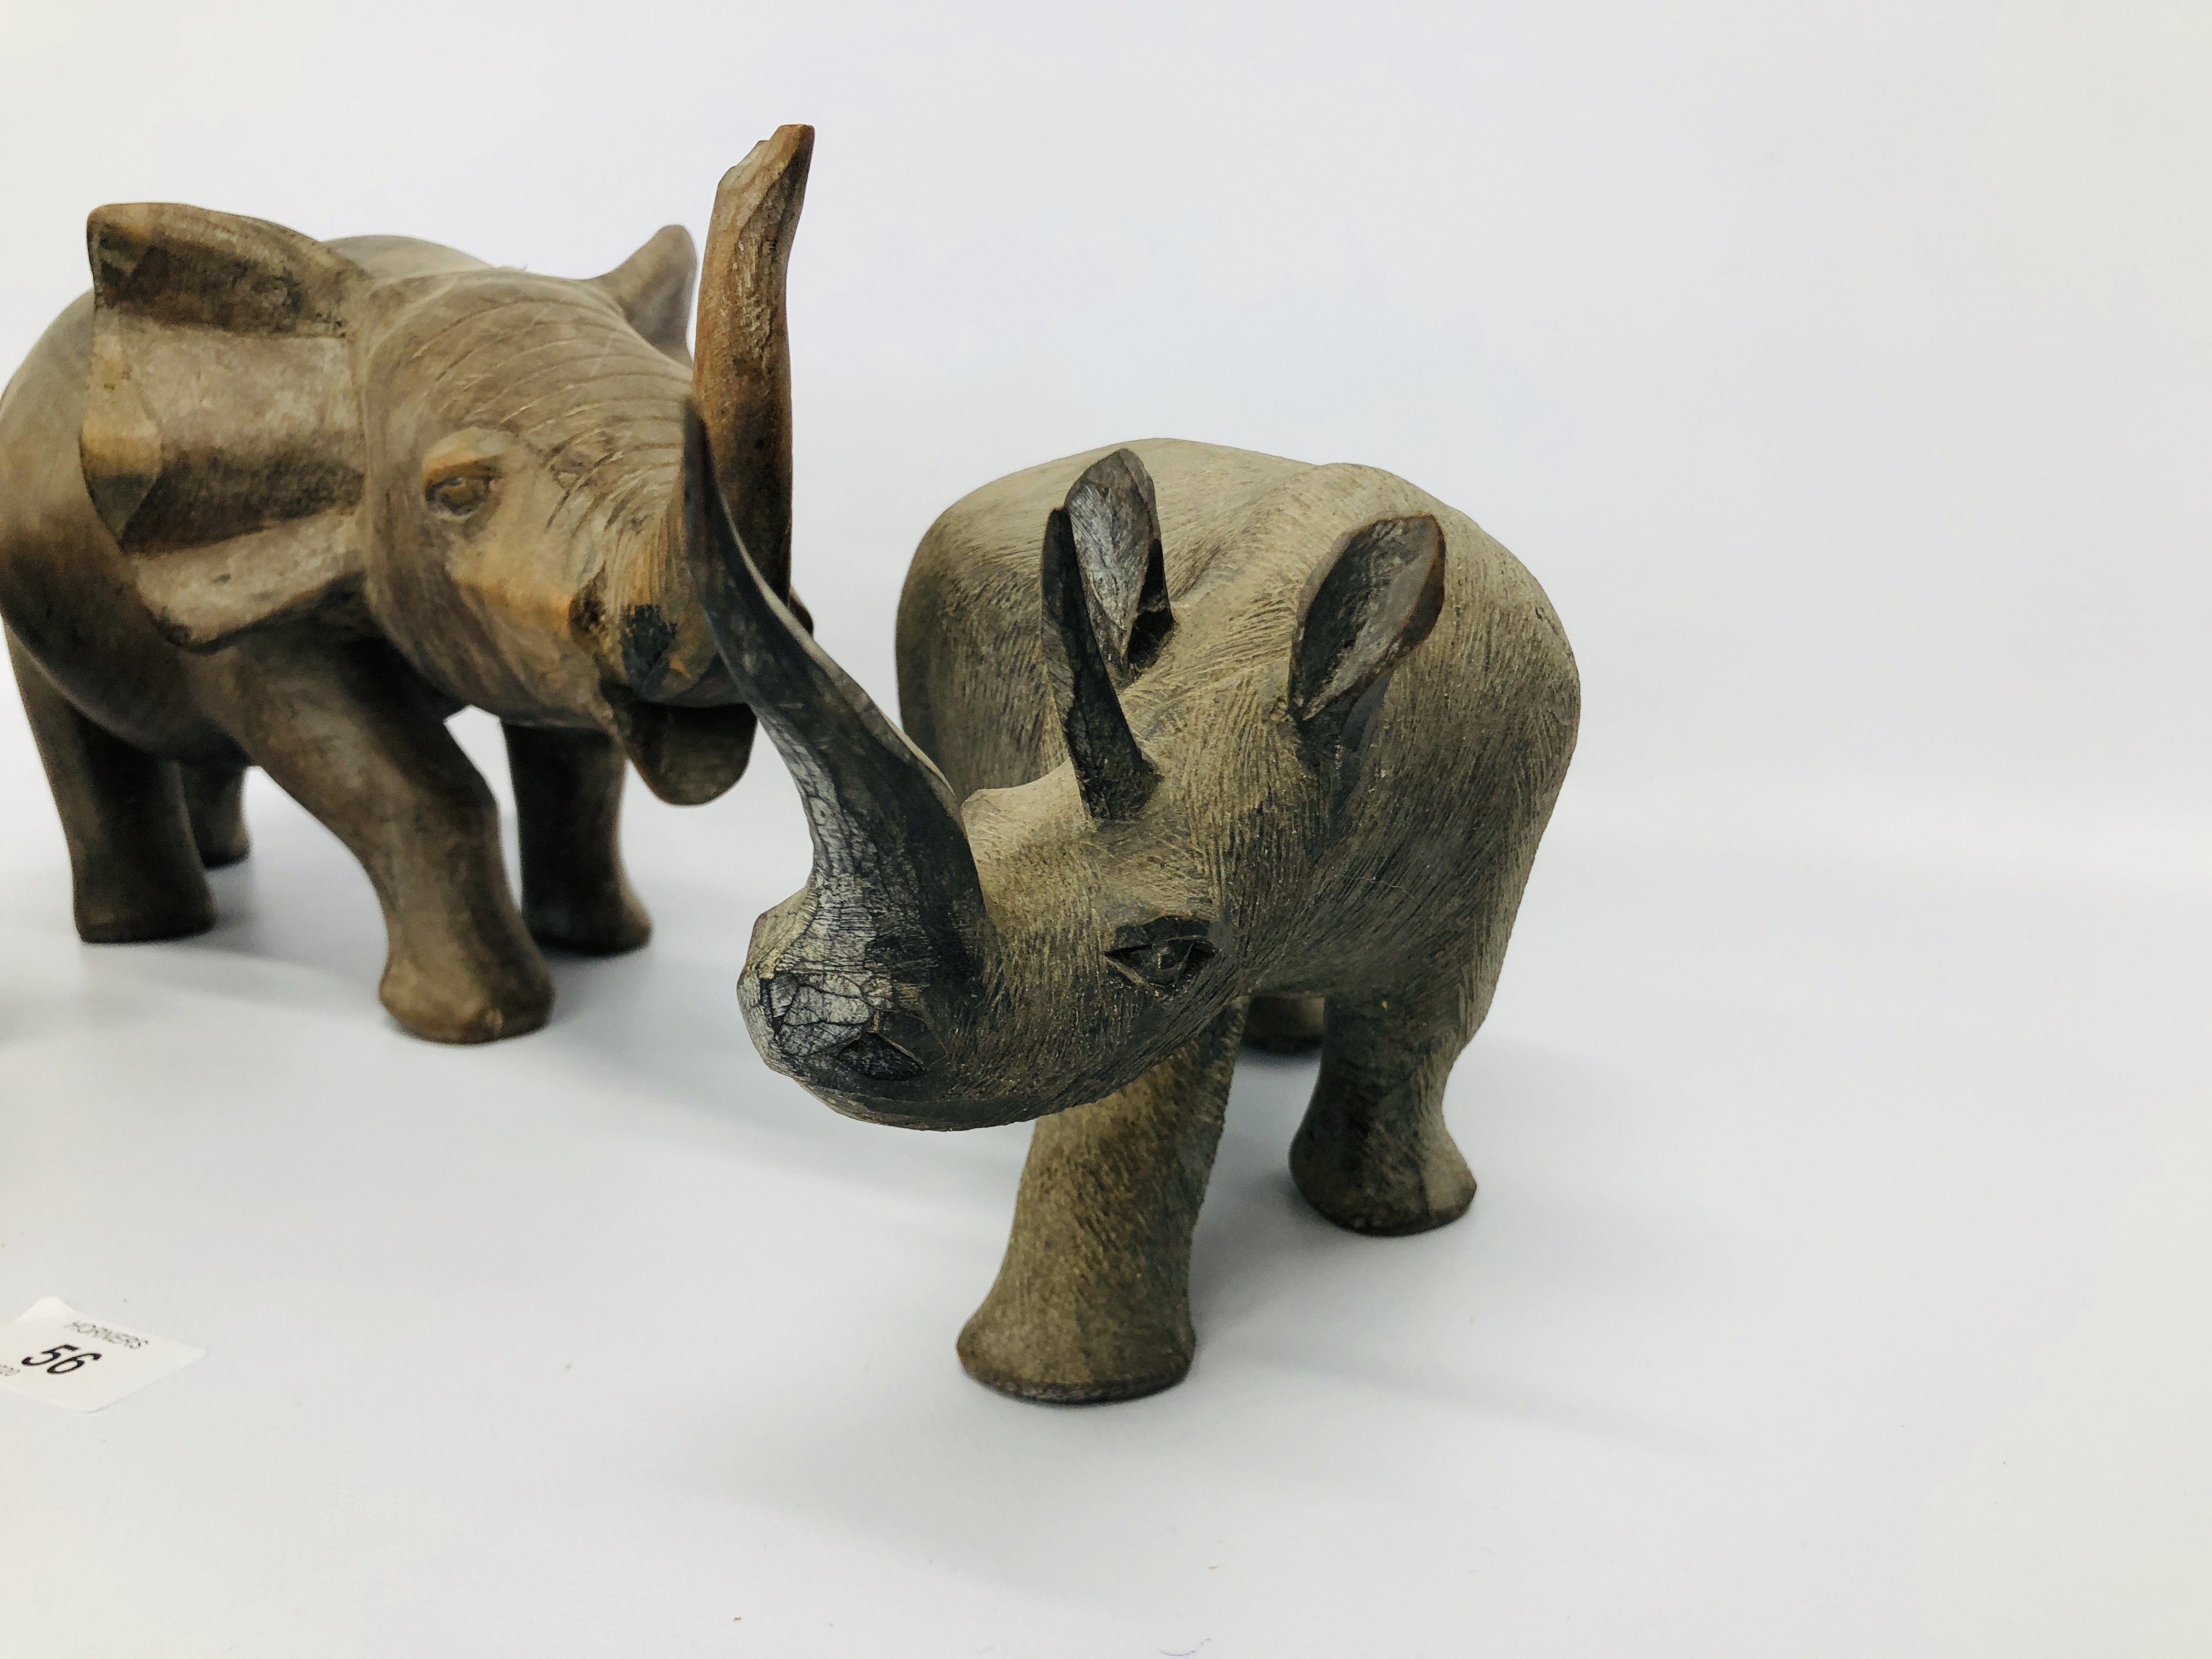 HEAVY HARDWOOD AFRICAN CARVED ELEPHANT & RHINO + PAIR OF RHINOCEROS BOOKENDS - Image 3 of 4